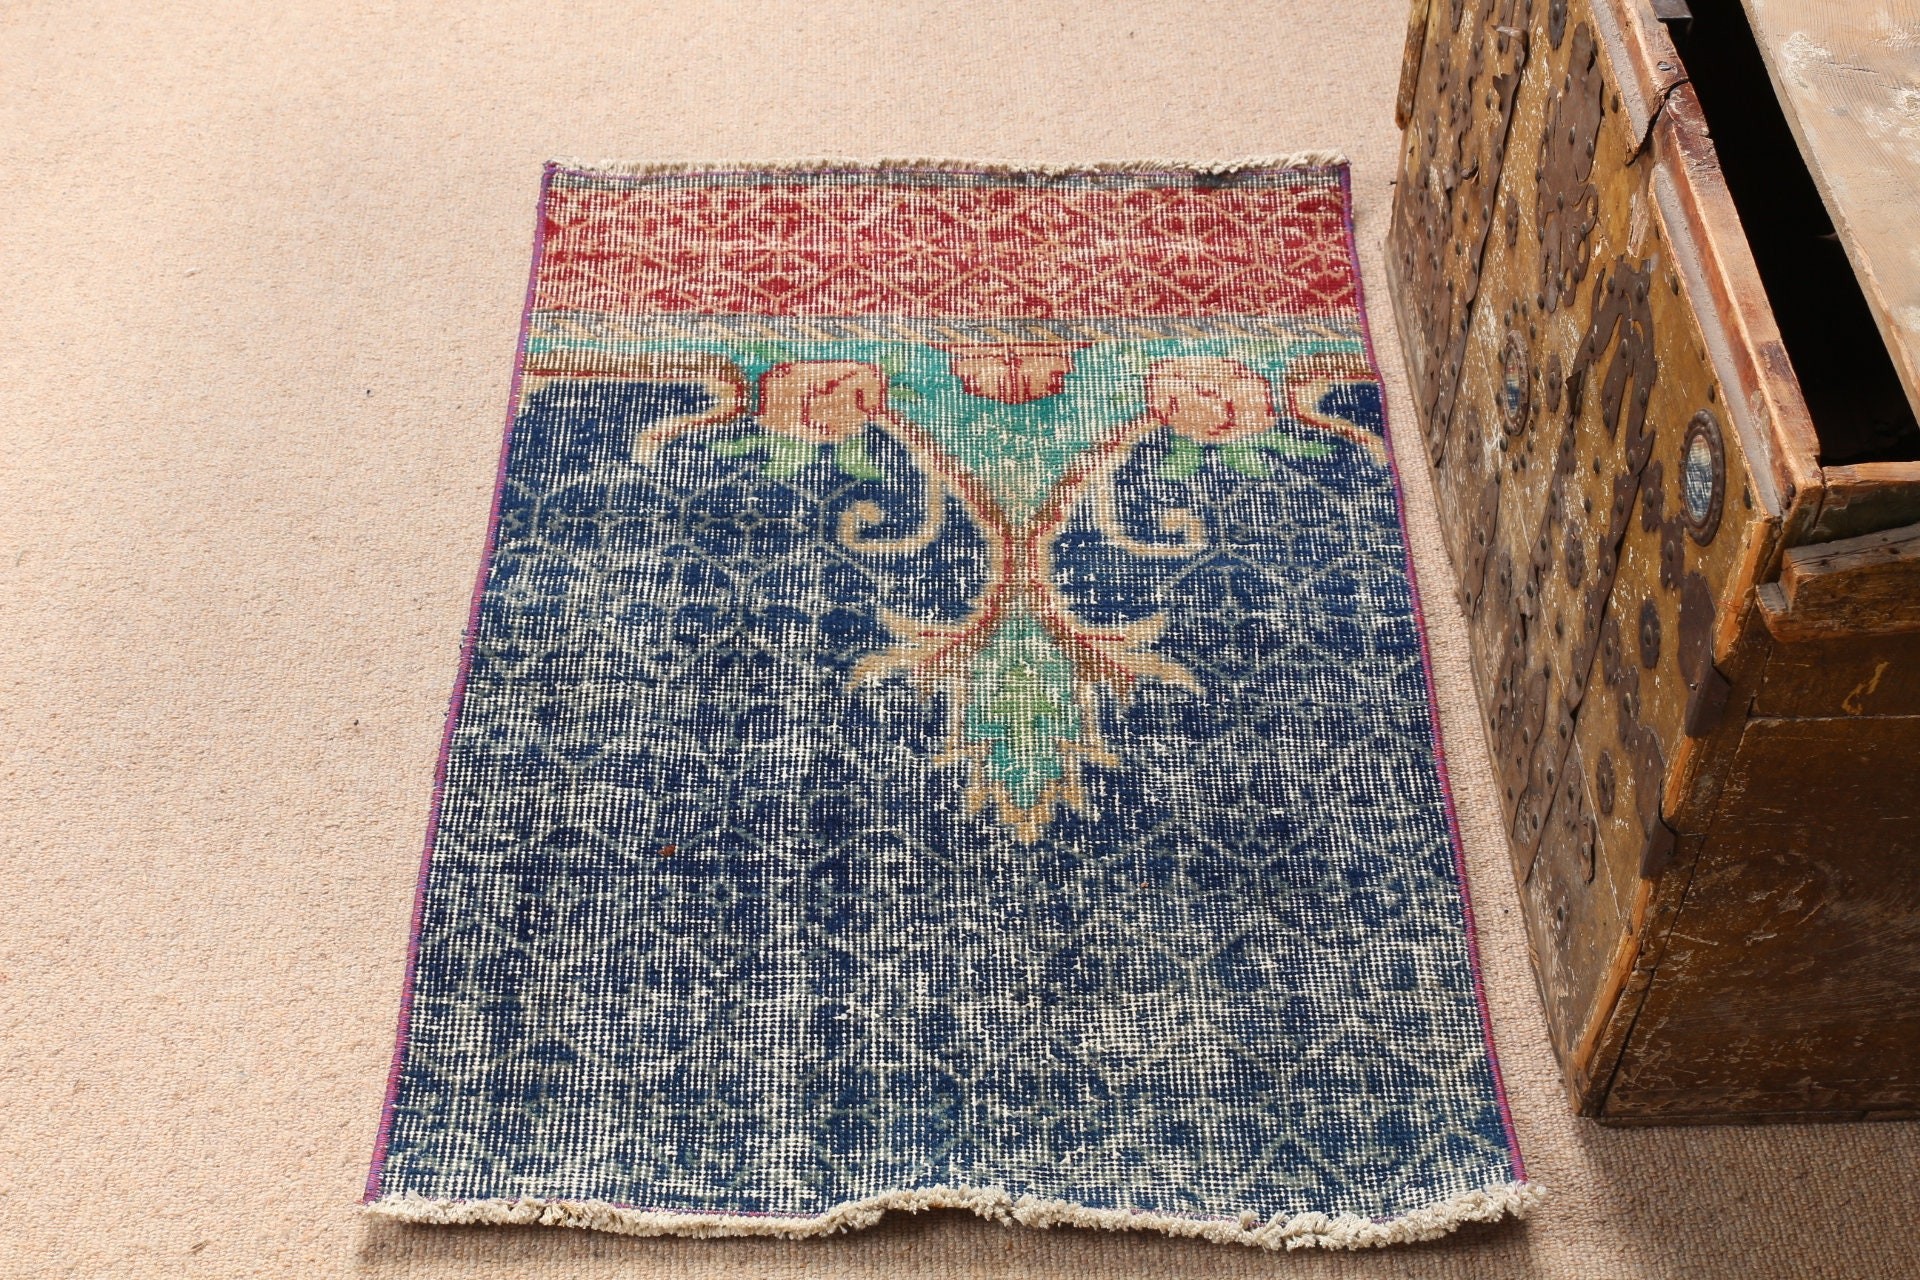 2.1x3.1 ft Small Rugs, Blue Kitchen Rugs, Floor Rugs, Turkish Rug, Rugs for Kitchen, Bathroom Rug, Moroccan Rugs, Outdoor Rug, Vintage Rugs